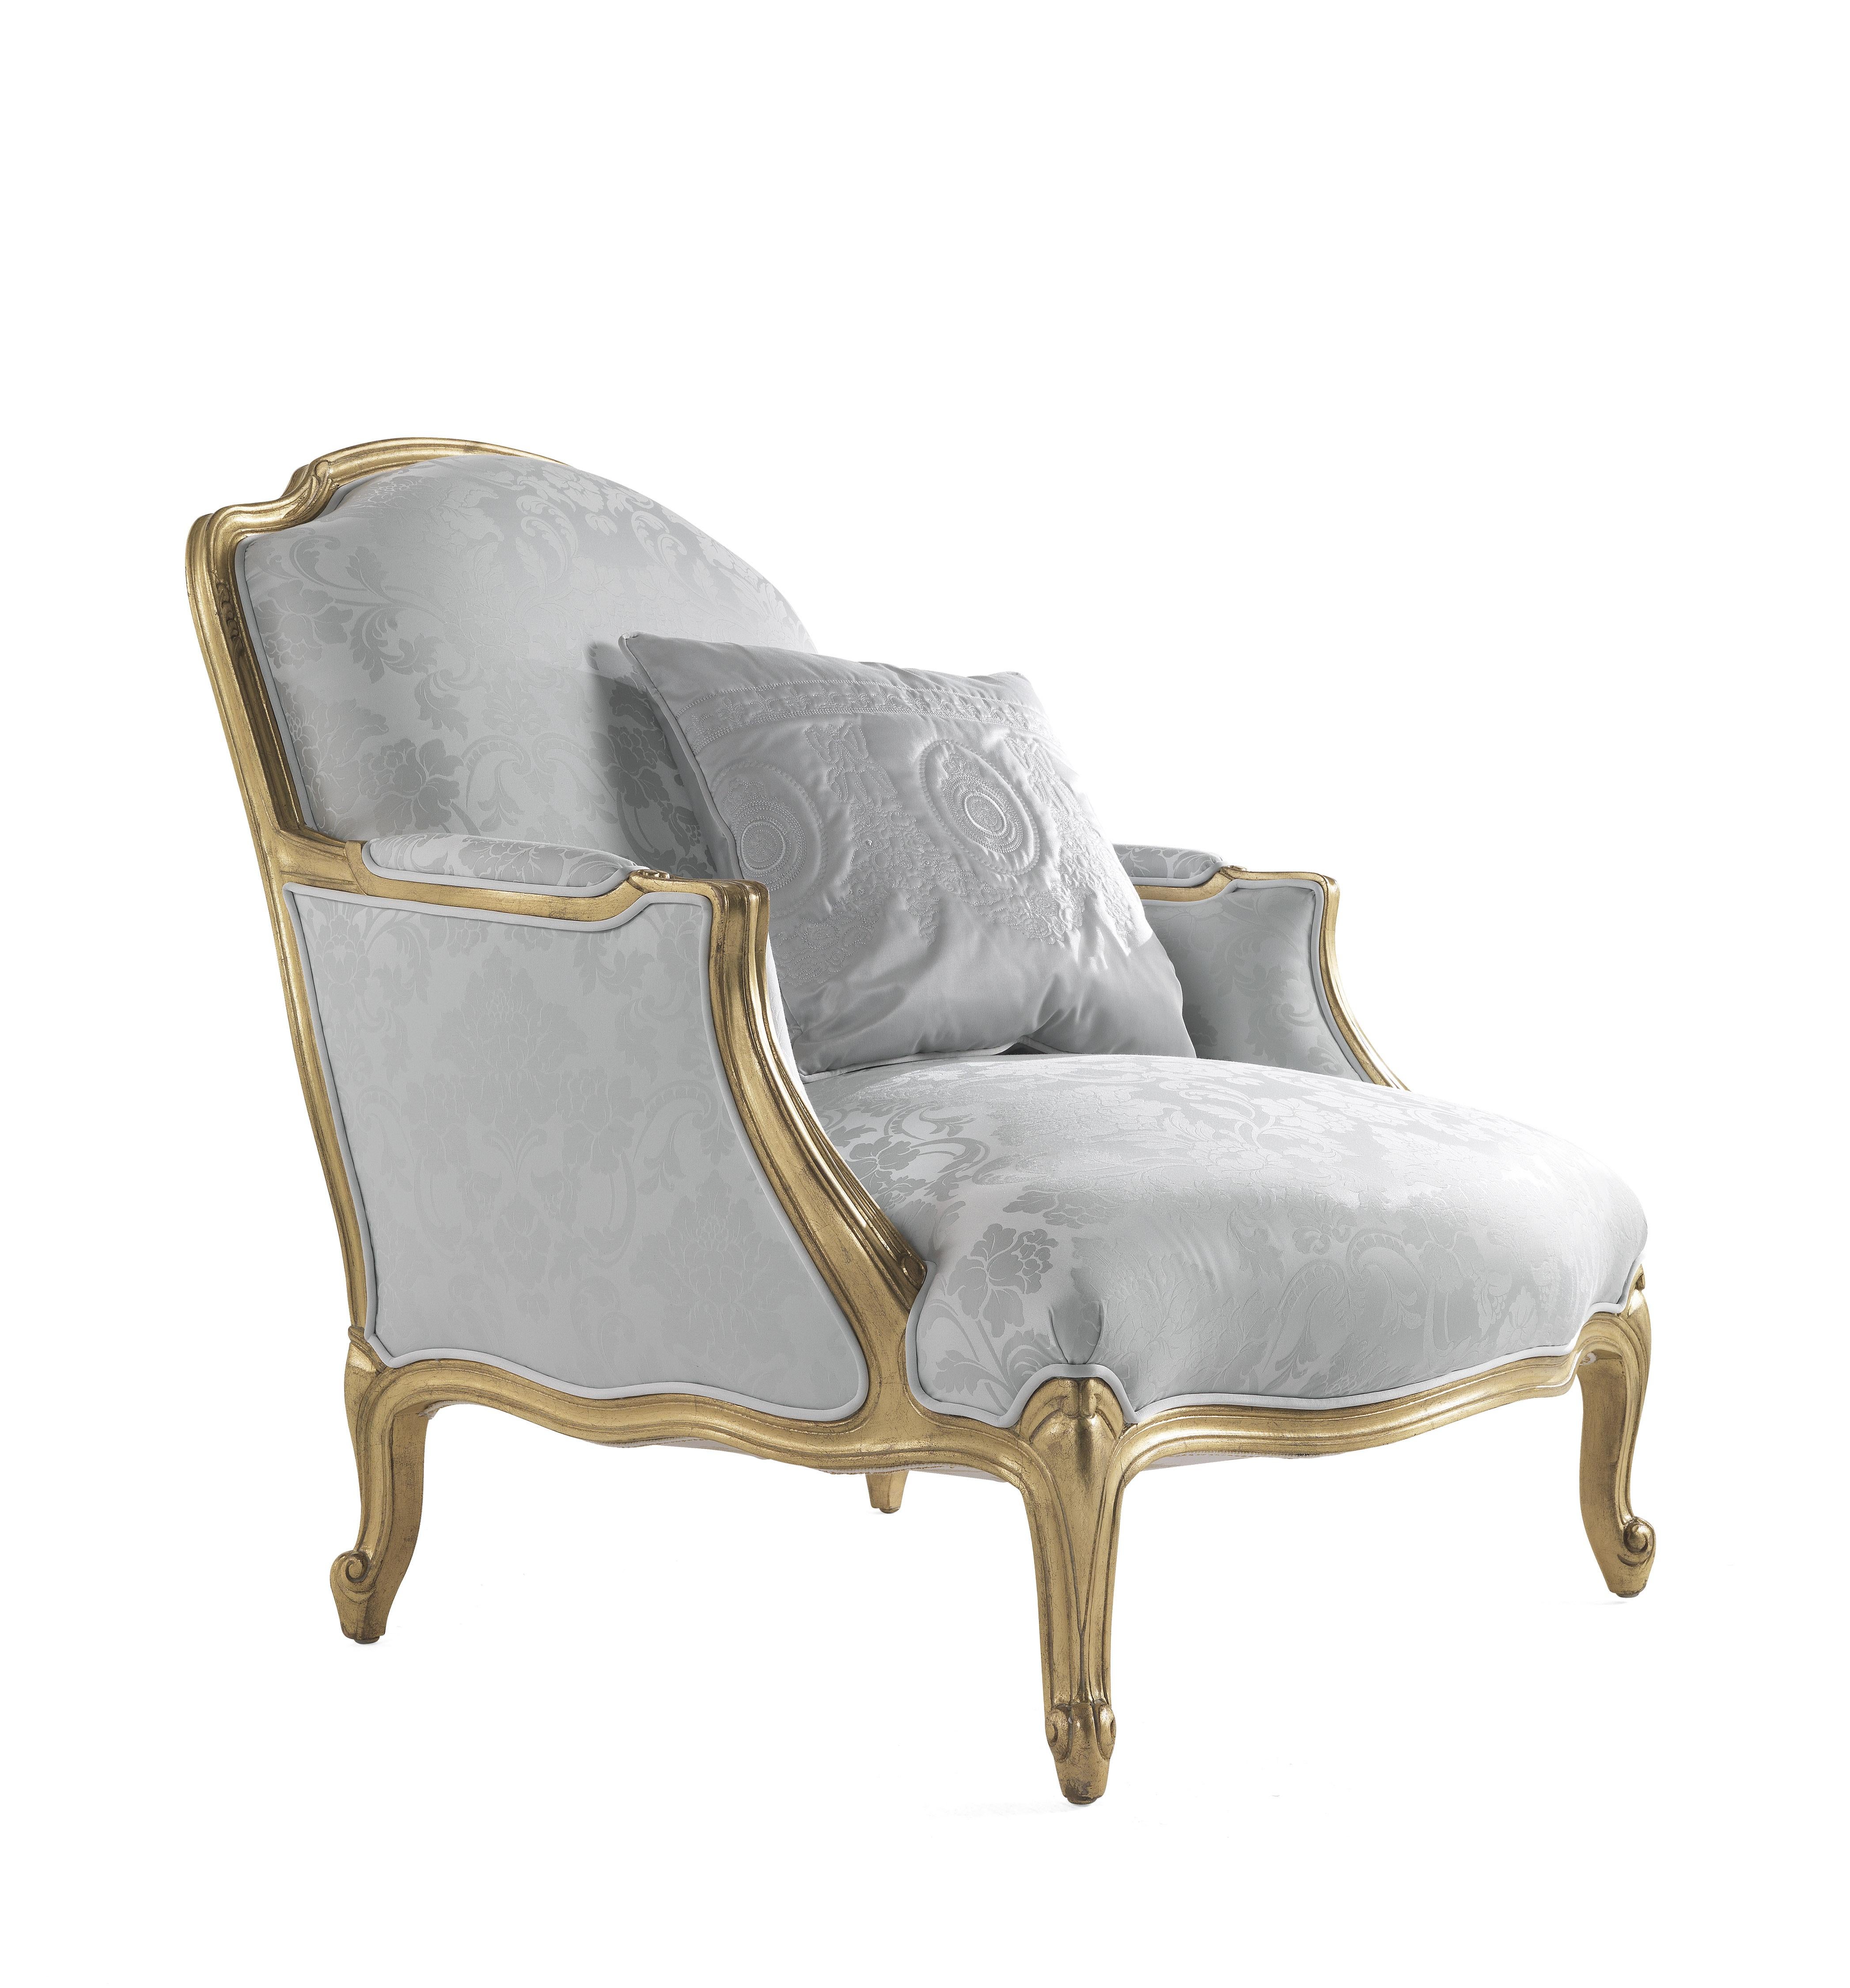 Bienvenue is an exquisite armchair in a delicate classic style, with structure in hand-carved beech wood and finishing in antique gold with patina. A harmonious combination of clean lines, delicate colors and decorative spirit, to create unique